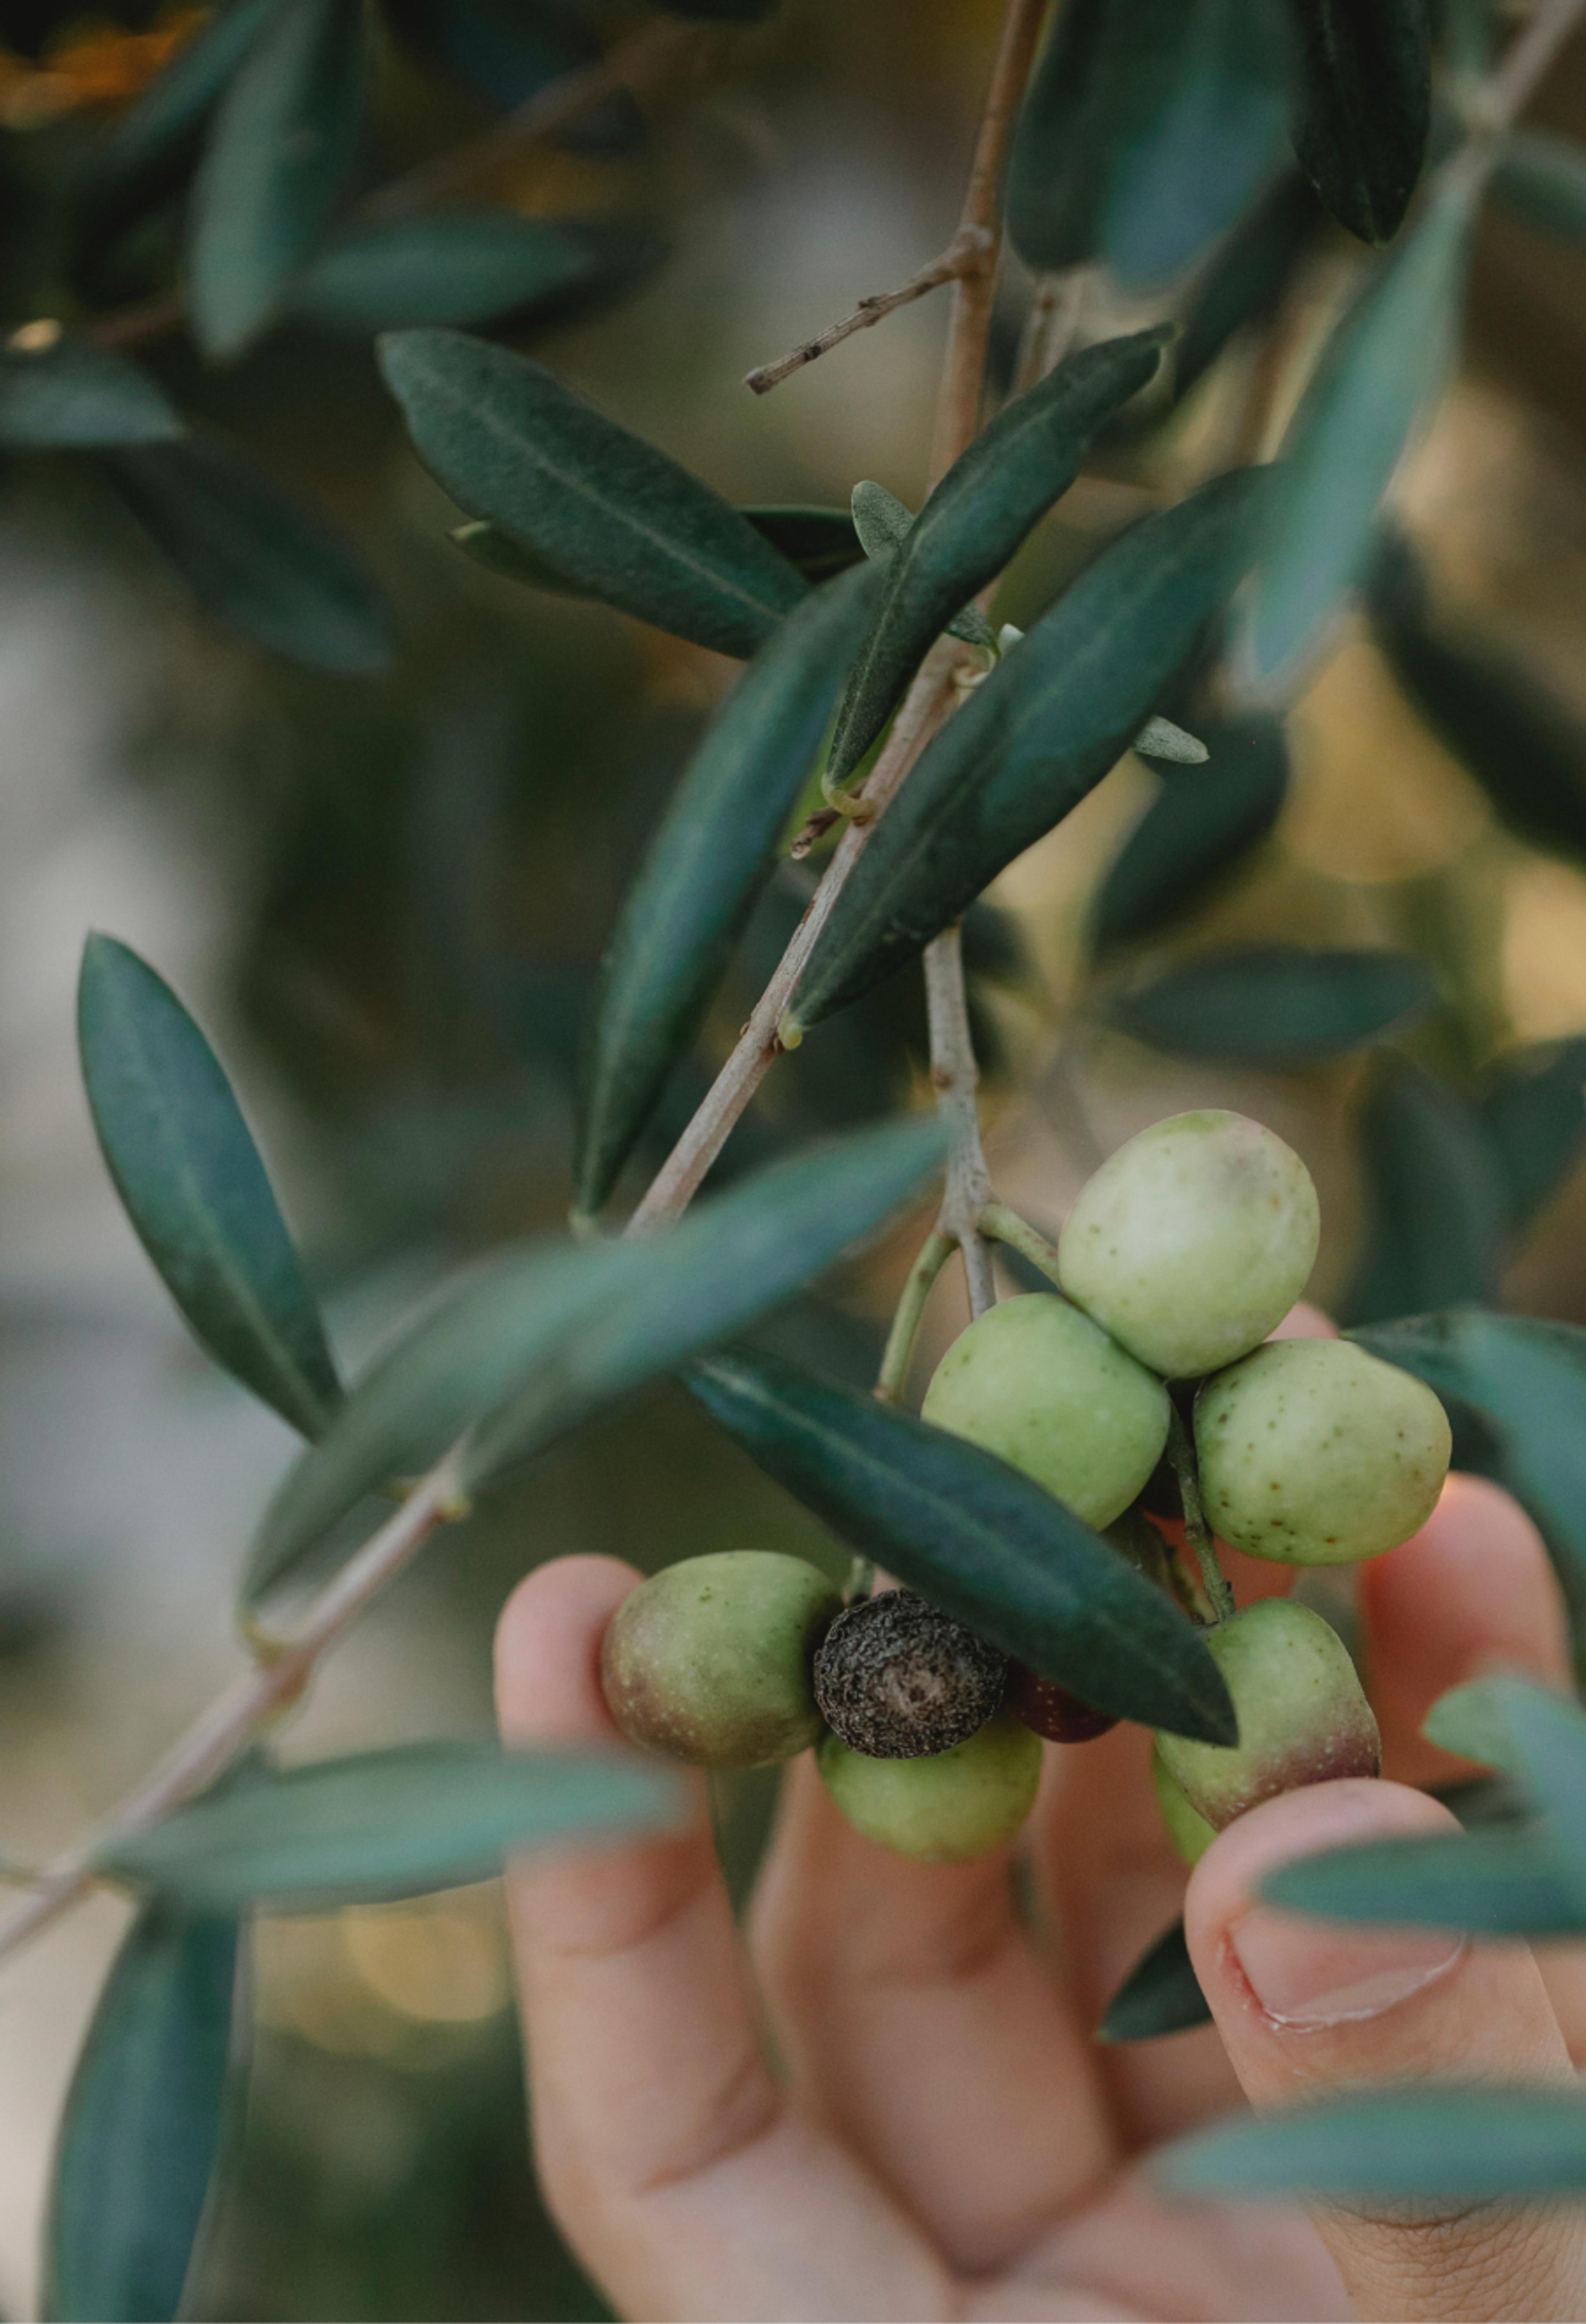 A hand picking some olives from a tree.